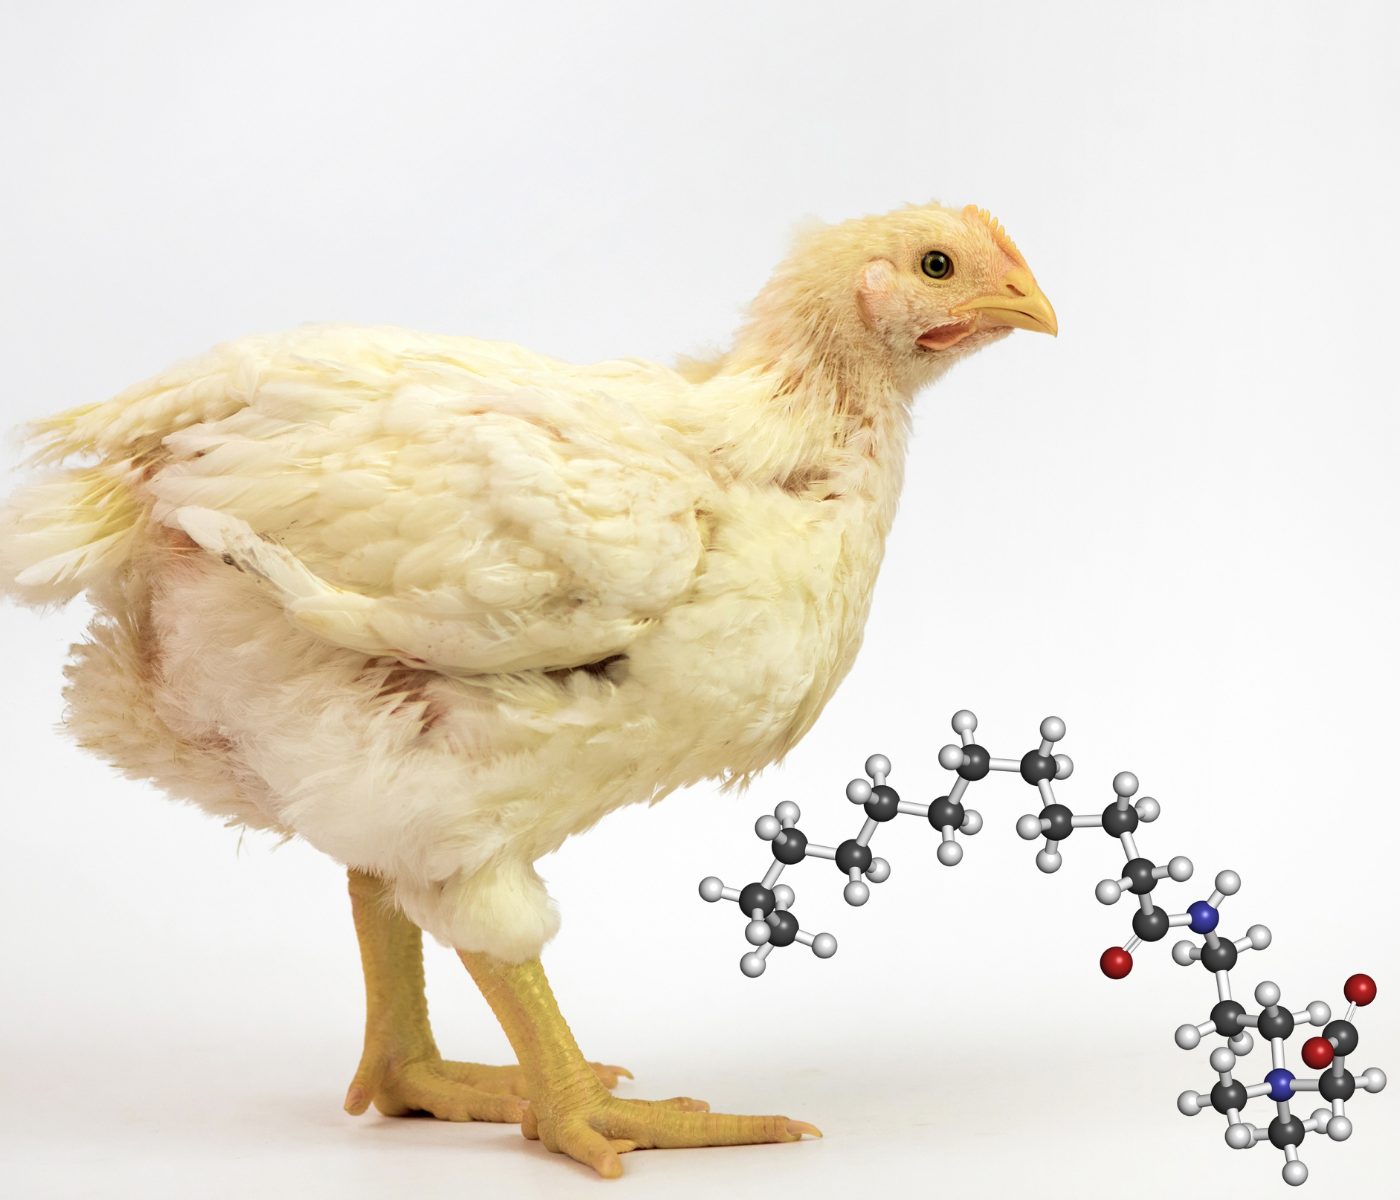 Betaine use in broiler diets